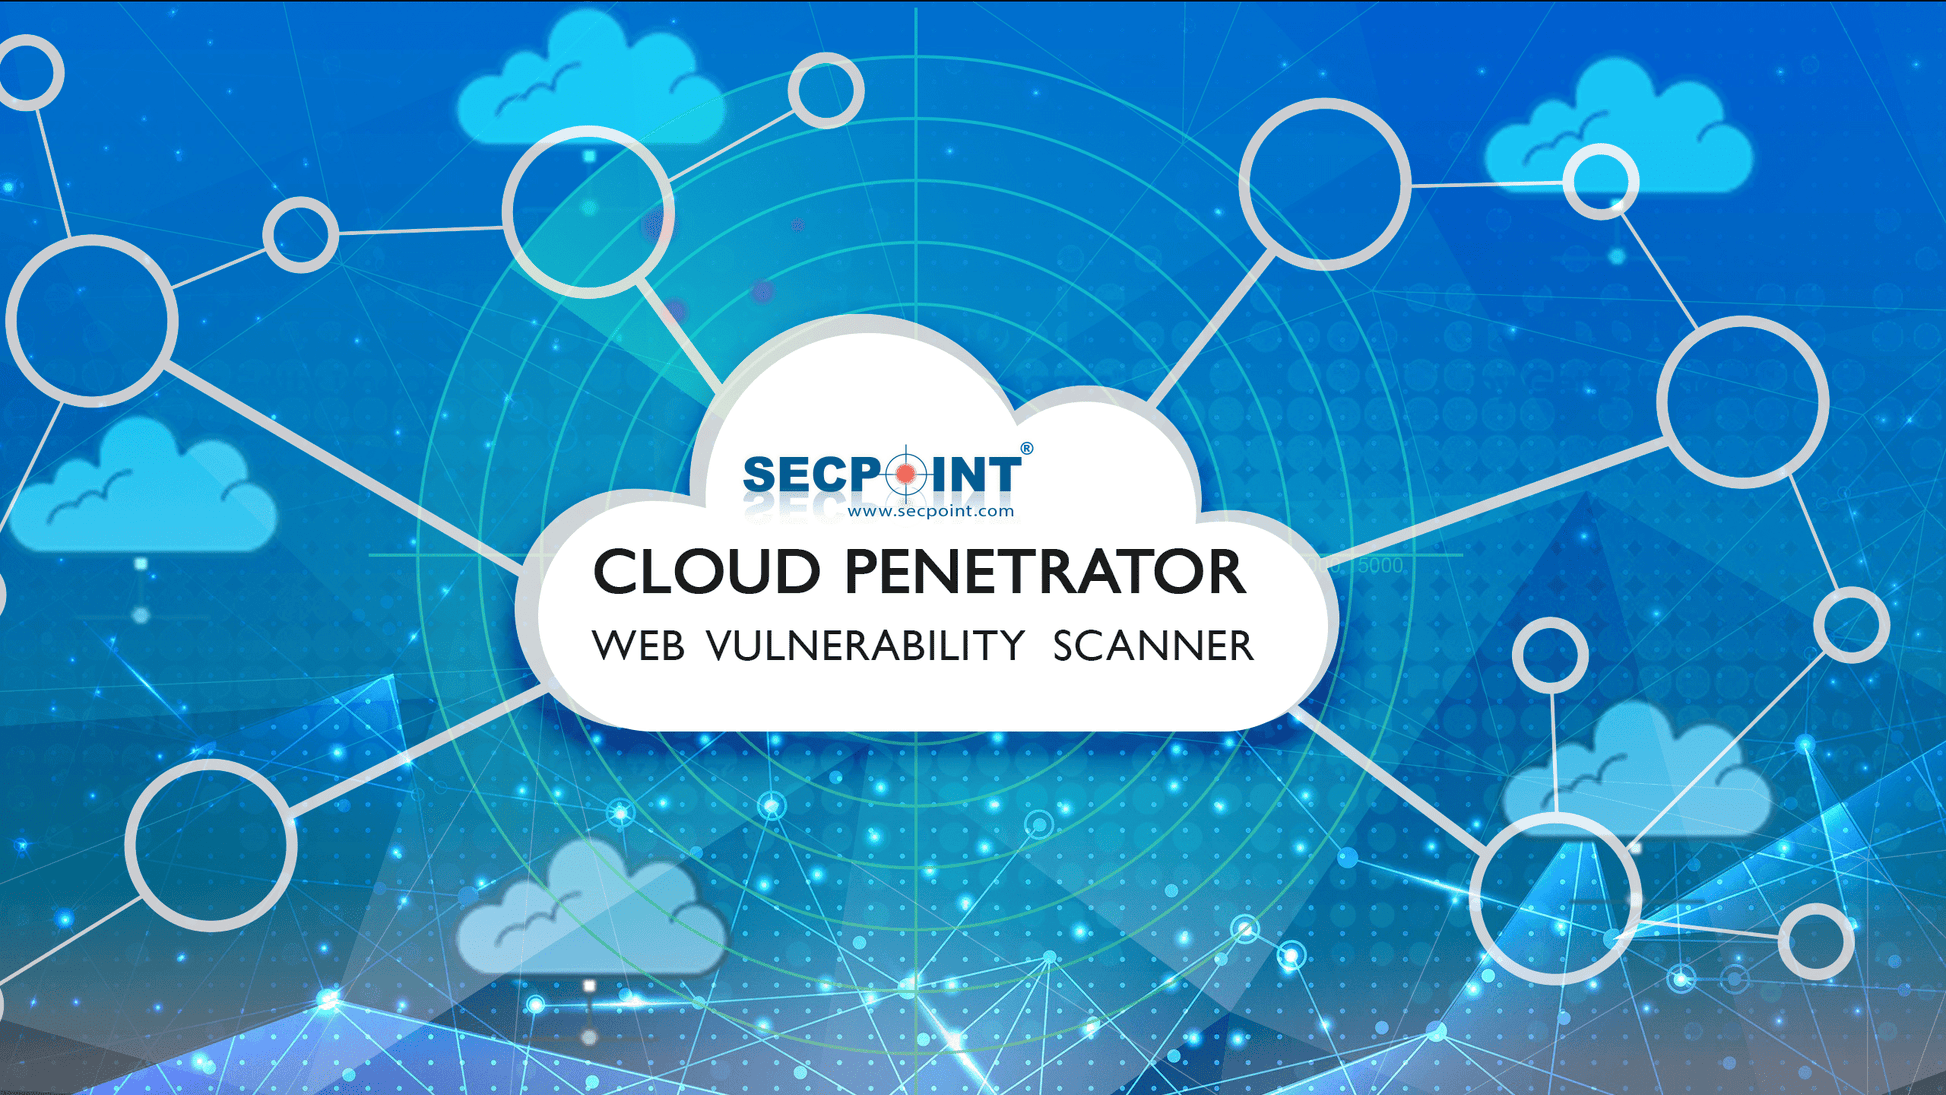 SecPoint Cloud Penetrator S9 - Vulnerability Scanning of 4 IPs for 1 Year Static Scan License - SecPoint